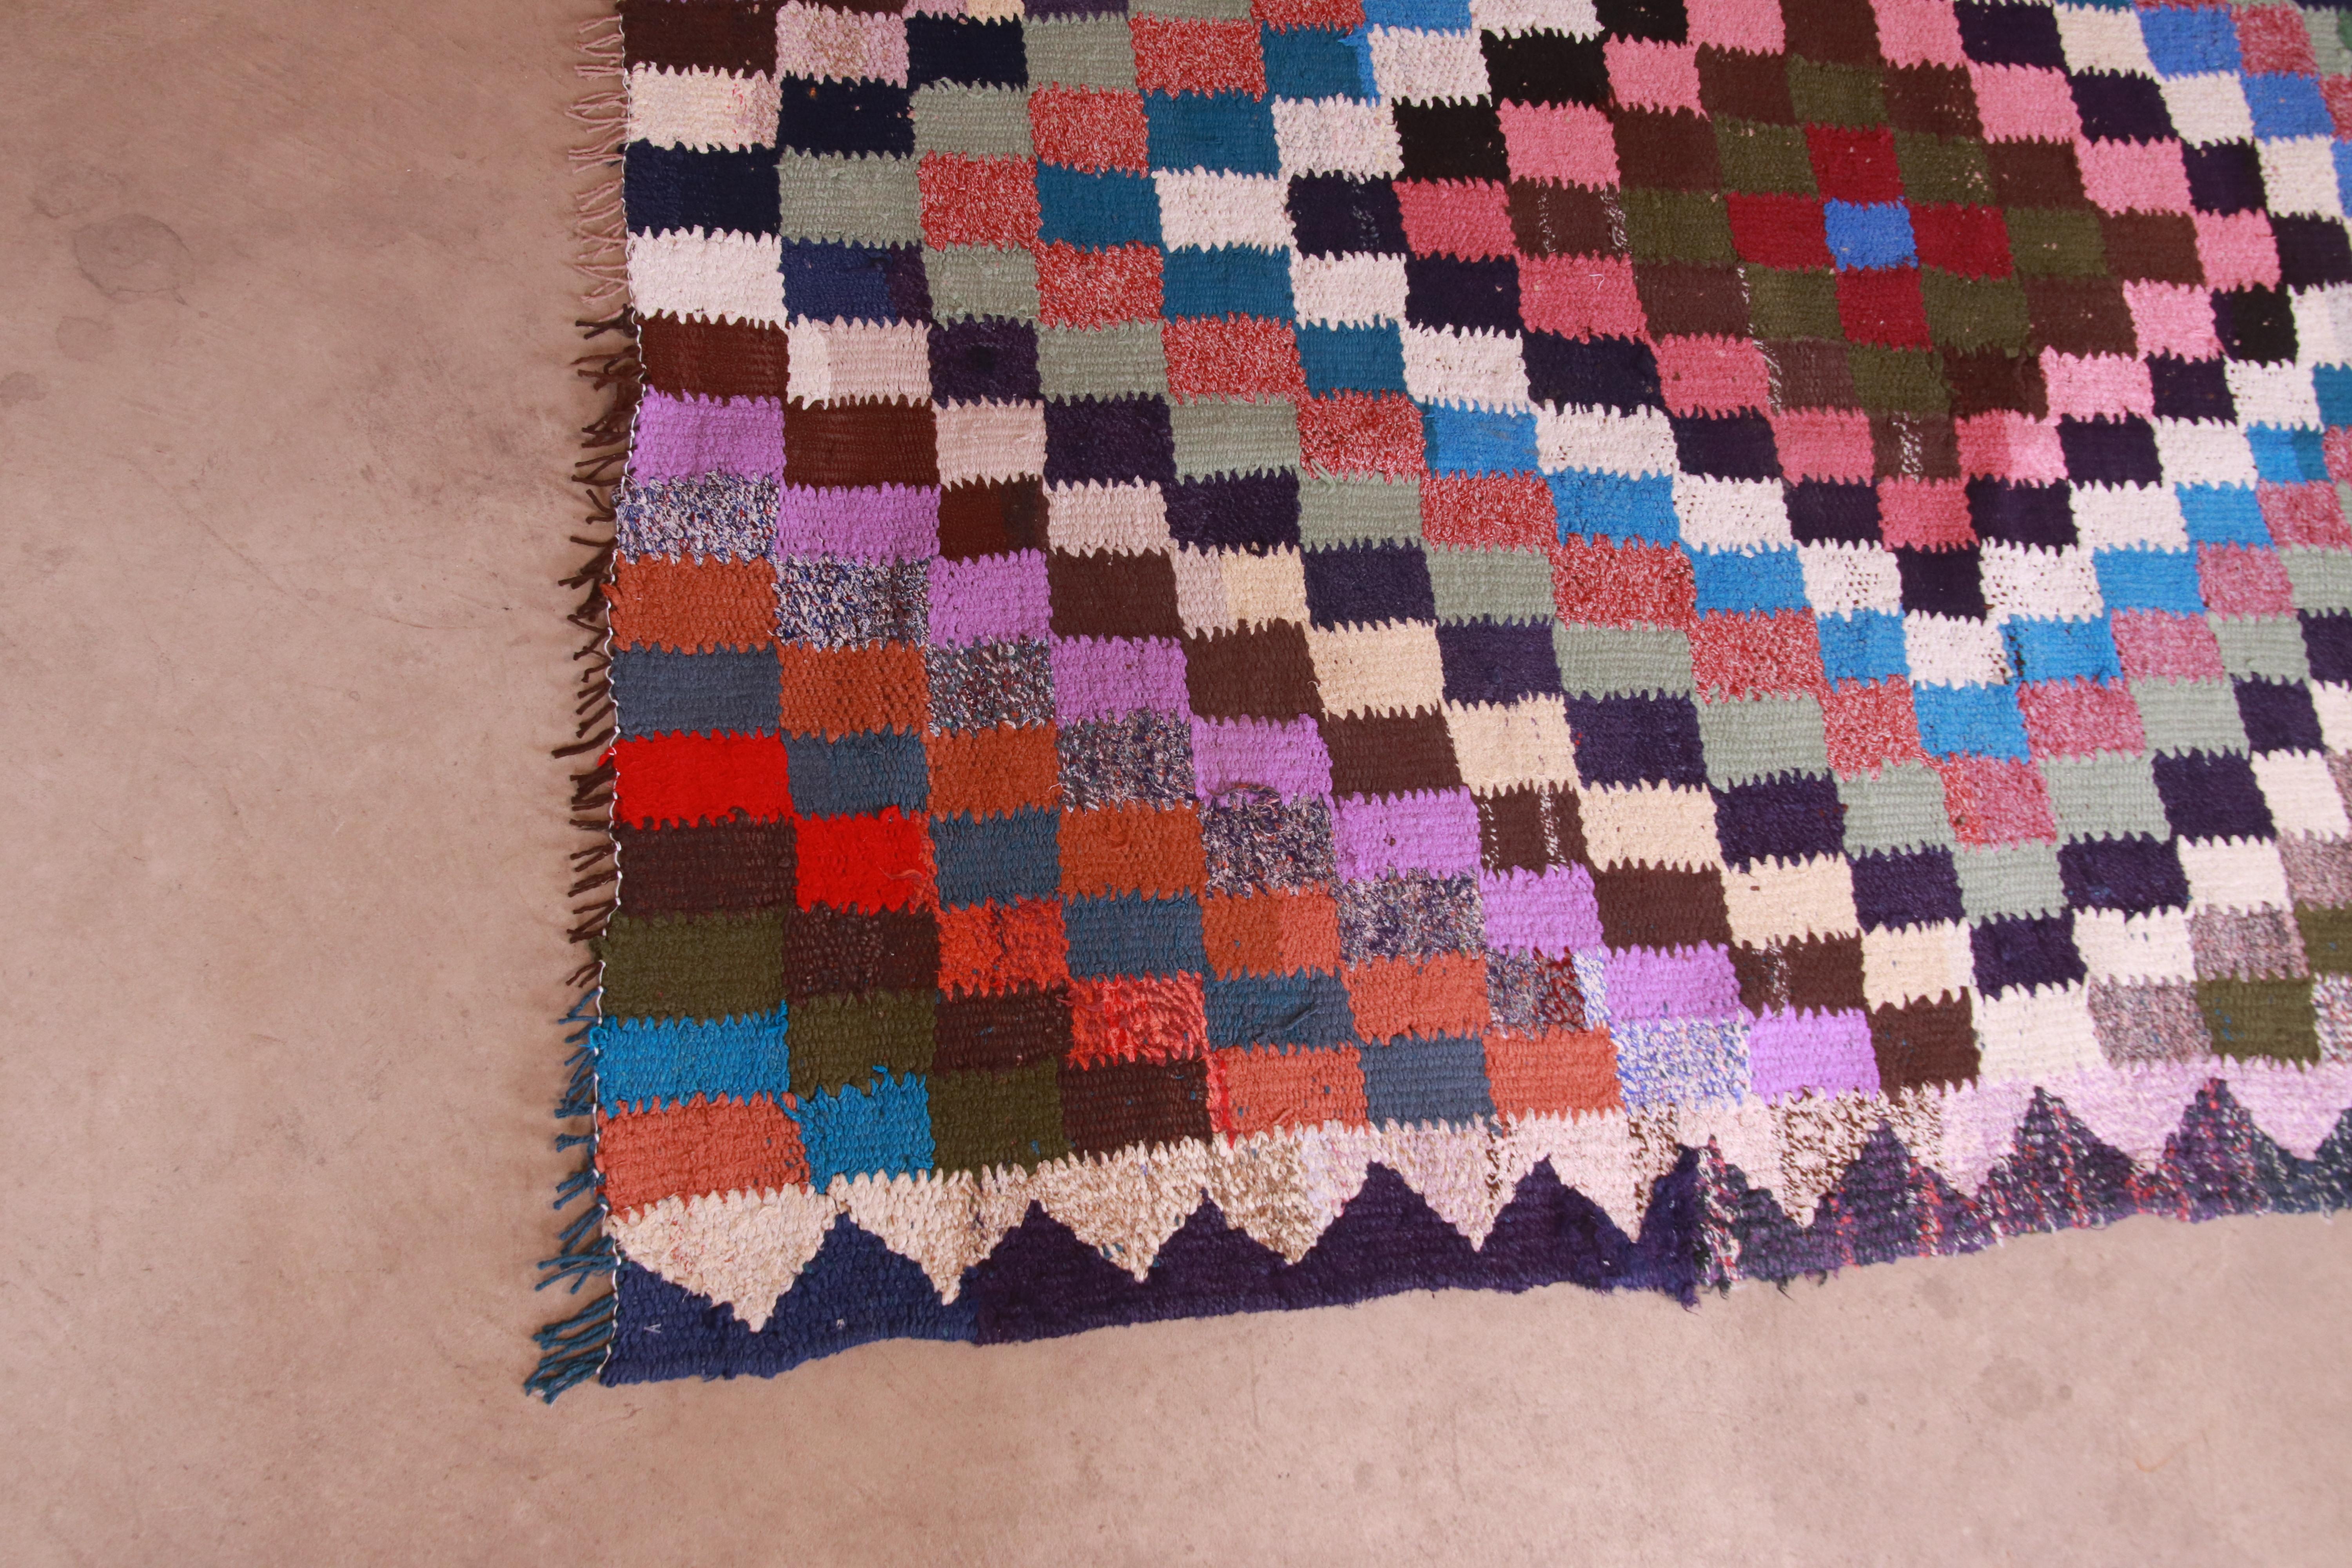 20th Century Vintage Handwoven Persian Kilim Rug with Vibrant Colors